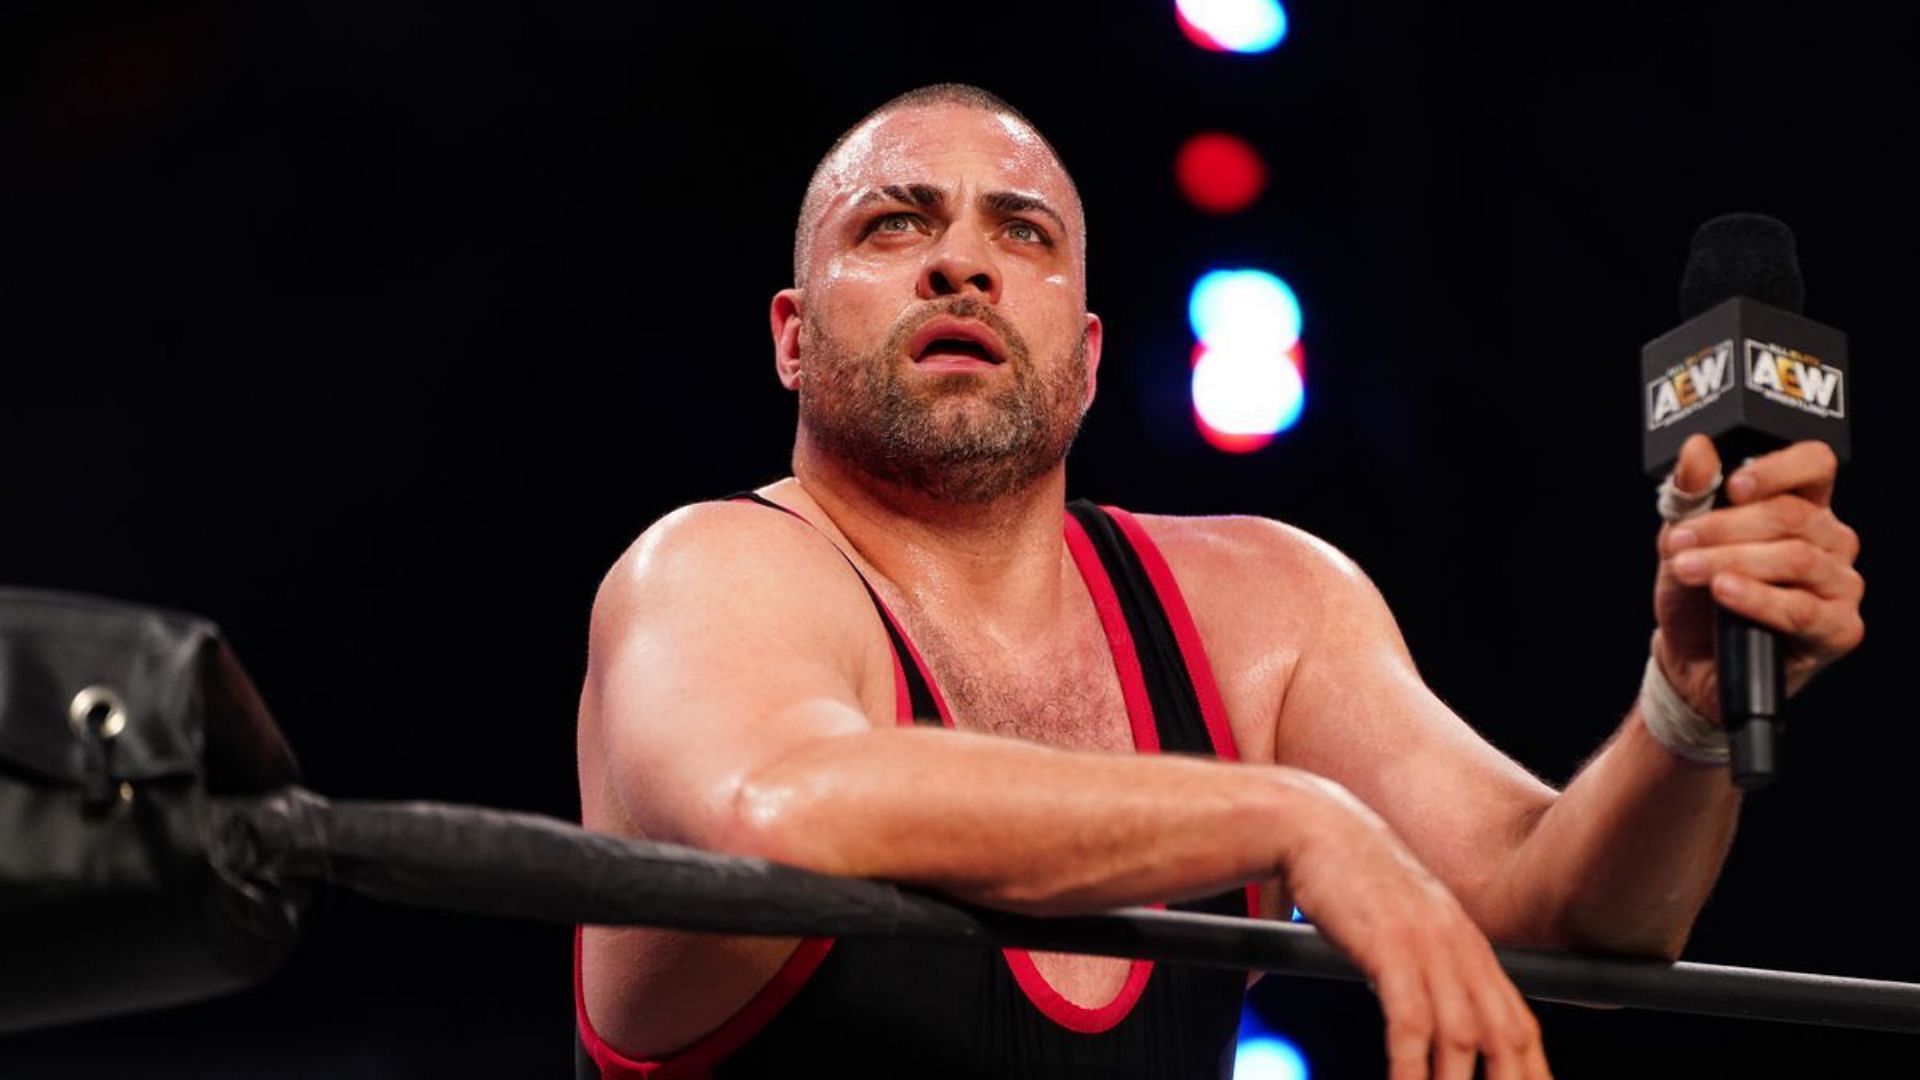 Eddie Kingston Set to Compete in NJPW Royal Quest III, Confirms NJPW